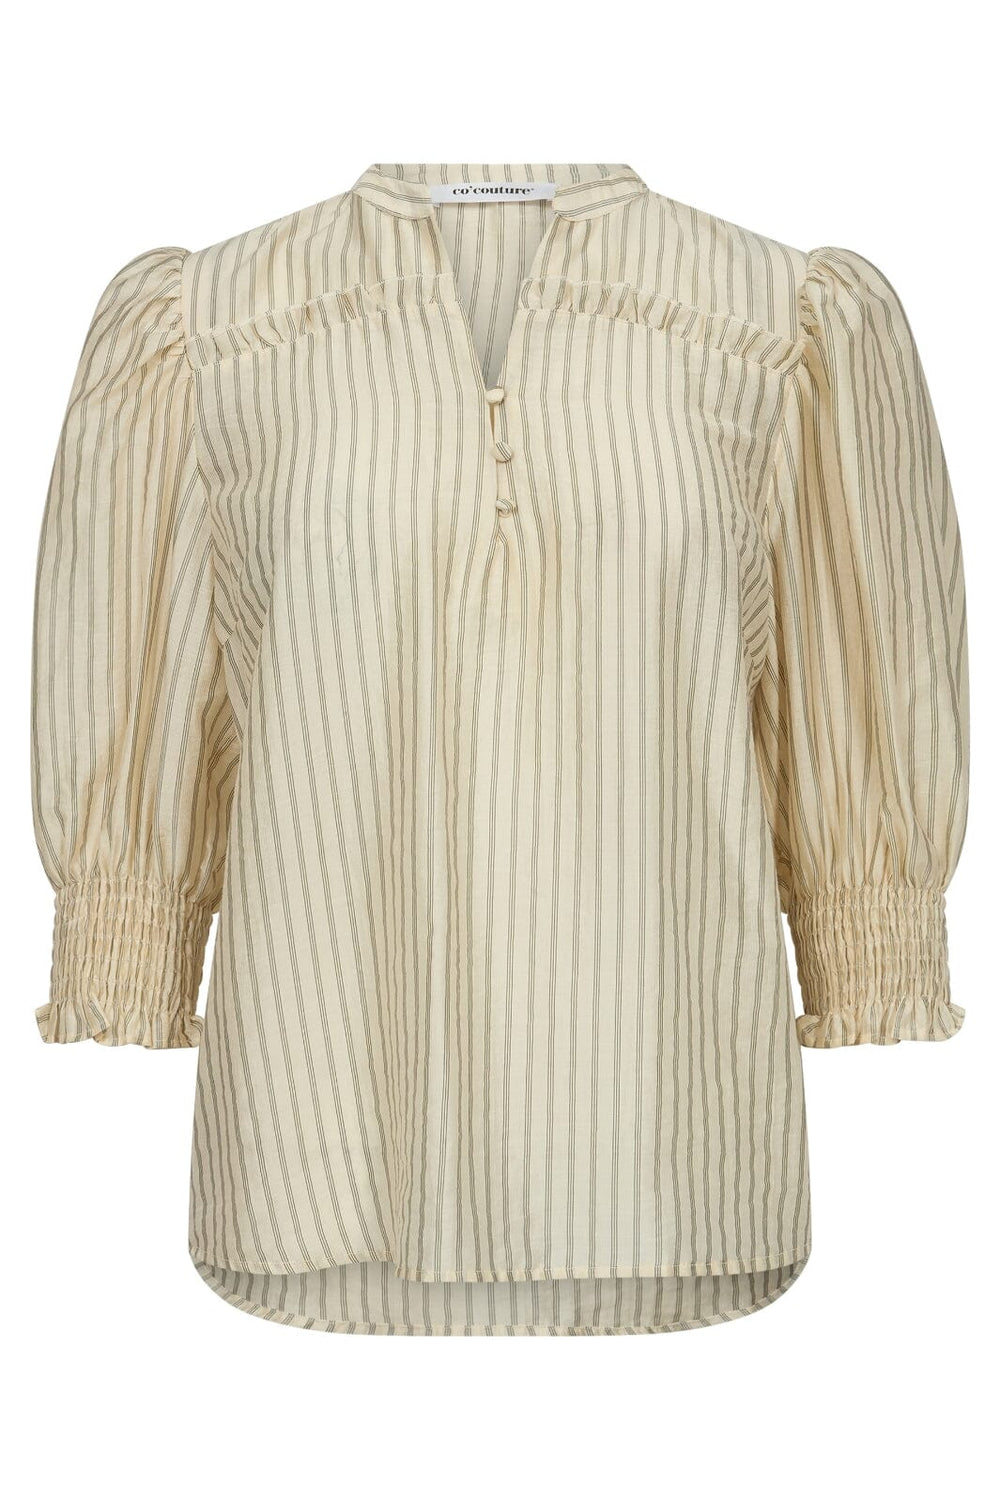 Co´couture - Samicc Stripe Ss Shirt 35435 - 6421 Pale Yellow Bluser 